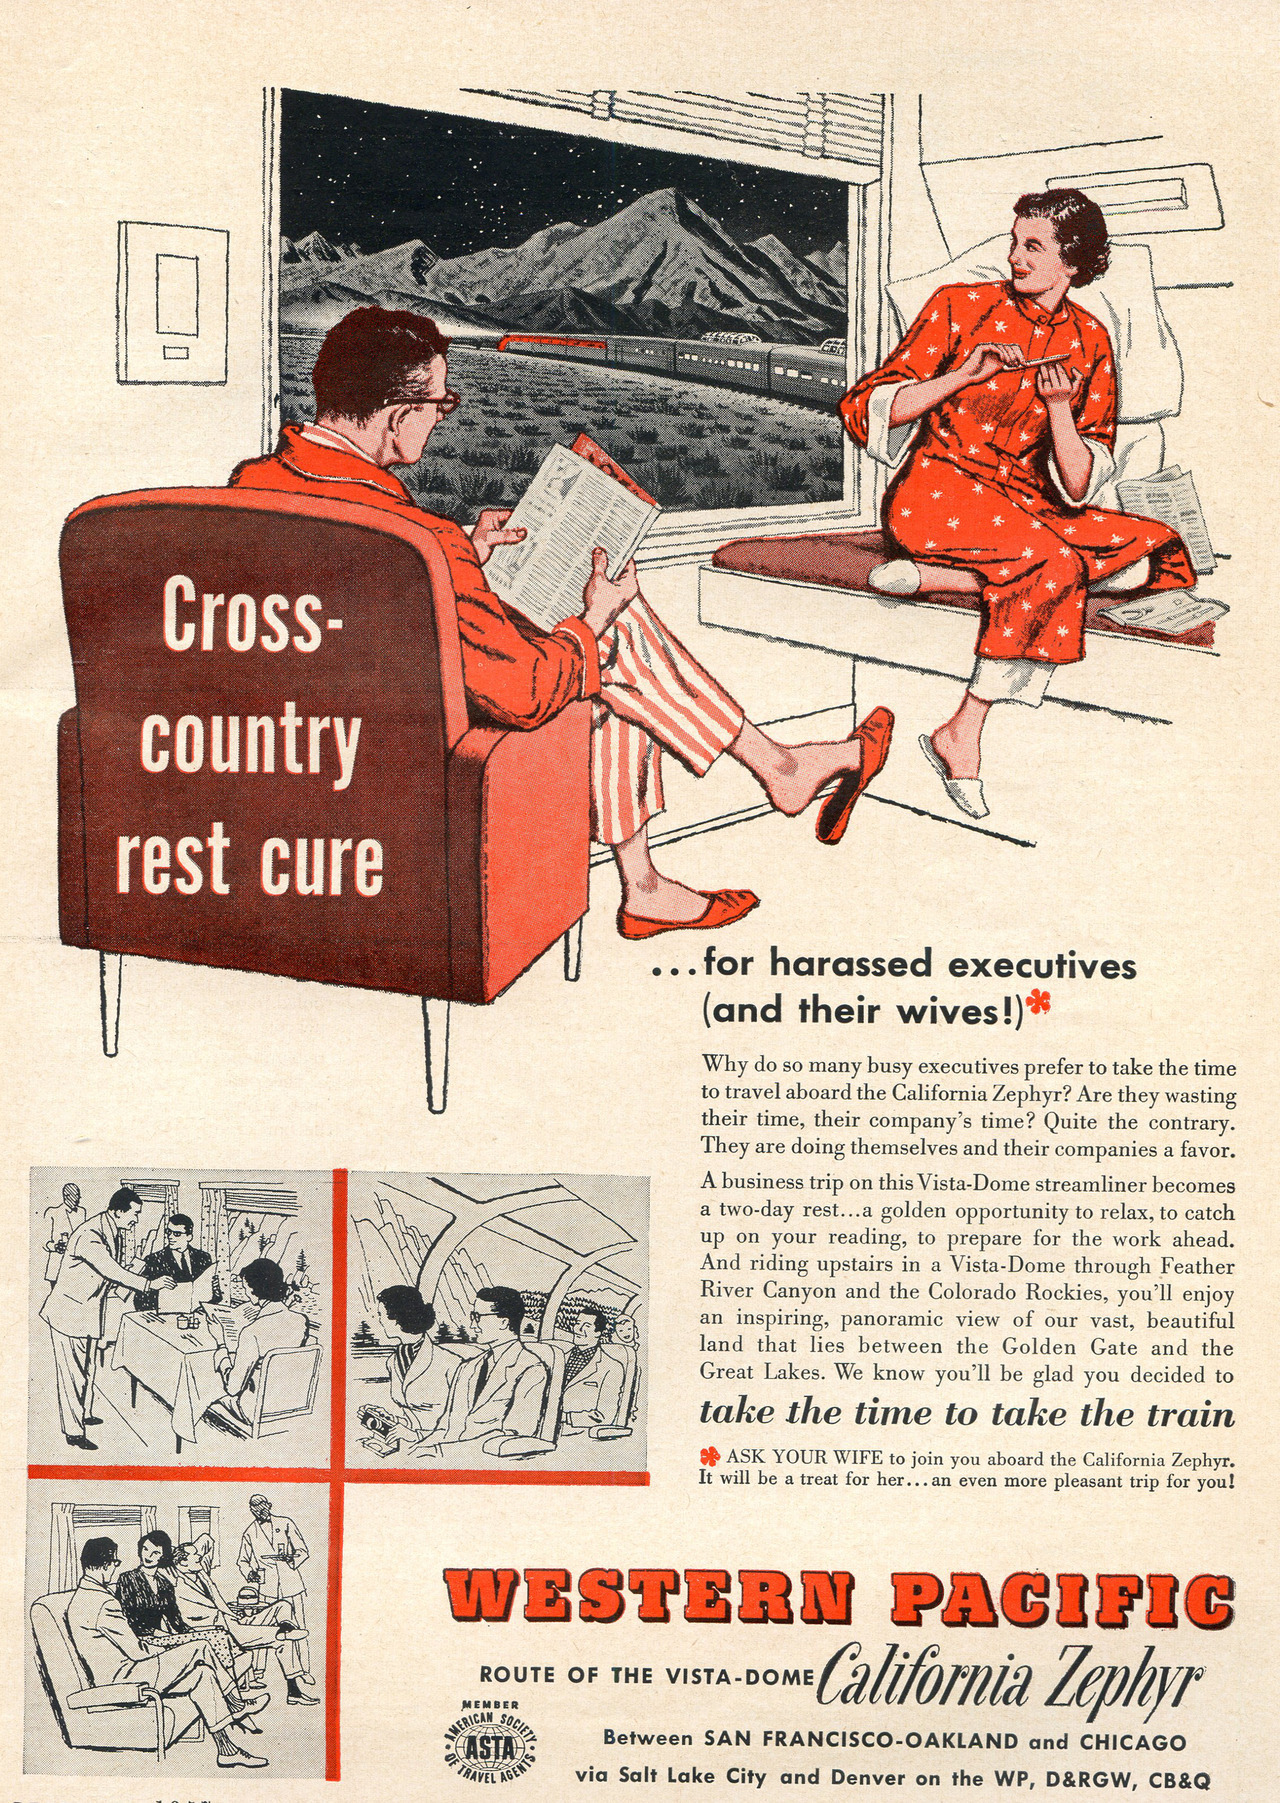 Western Pacific Railroad - published in Sunset - December 1957